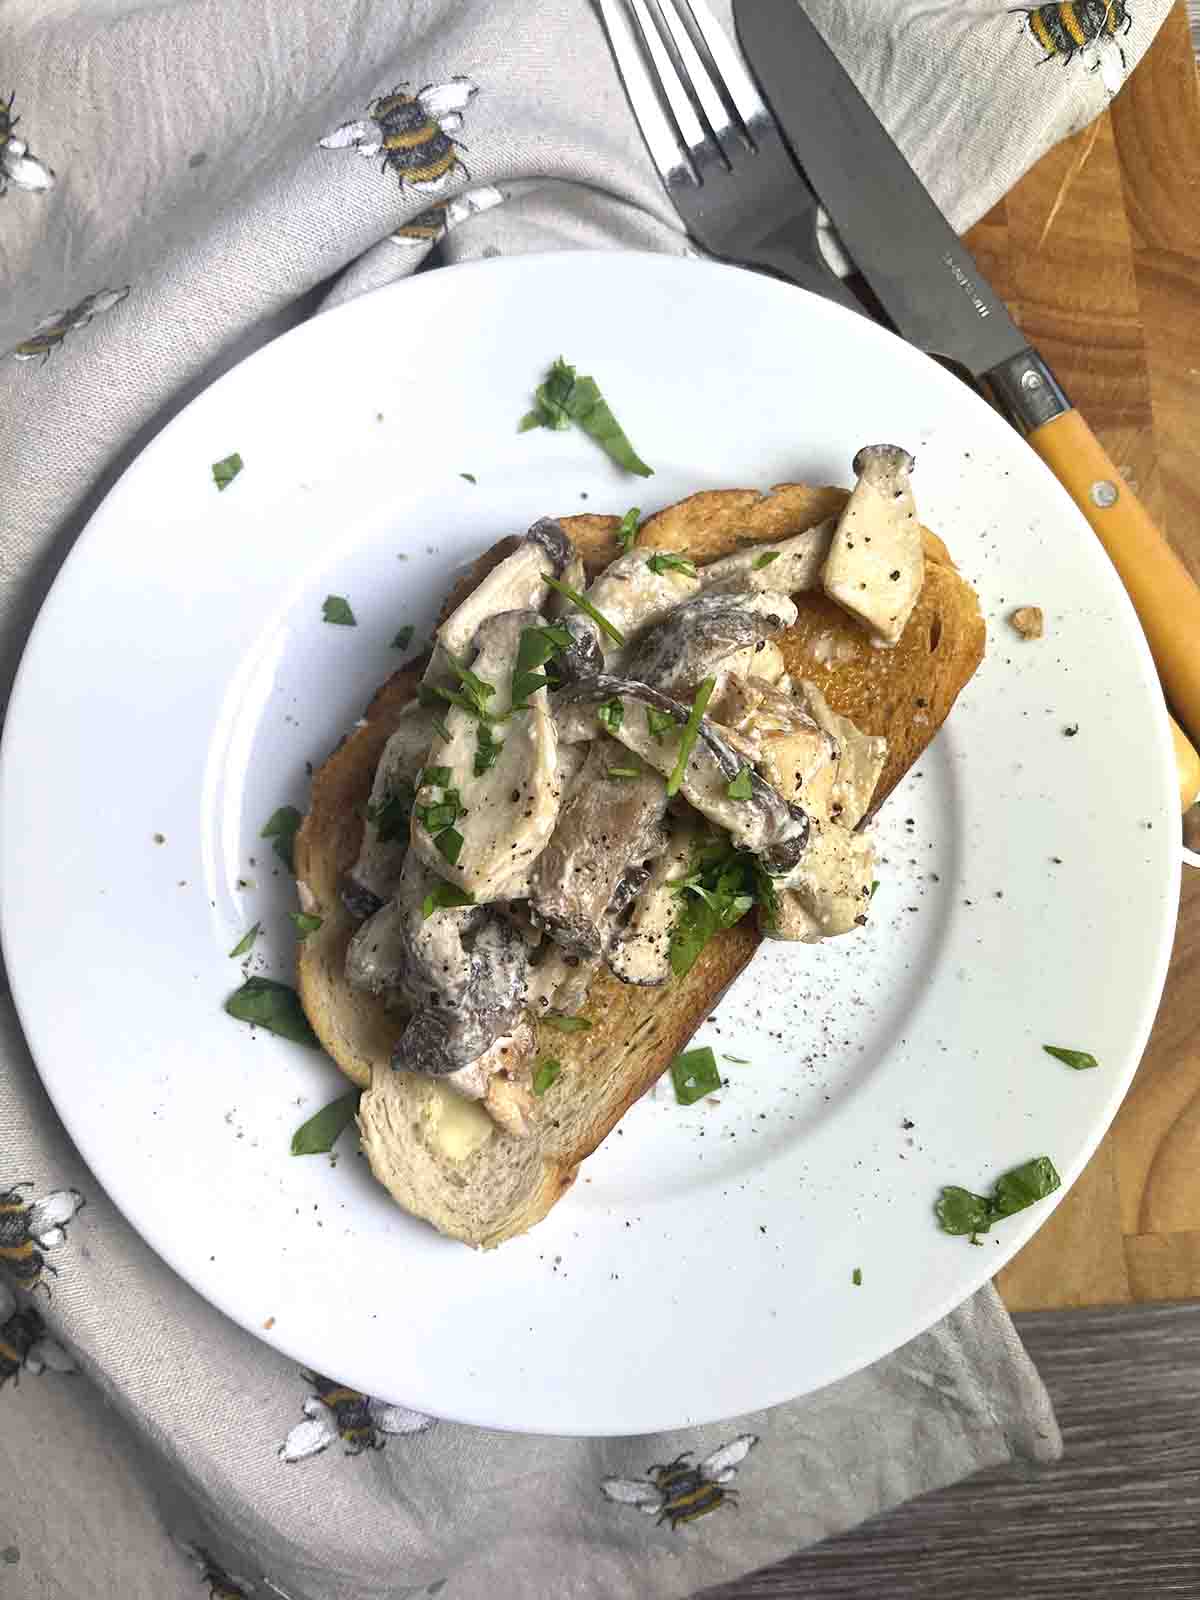 Creamy mushrooms on toast on a white plate with cutlery to the side.s